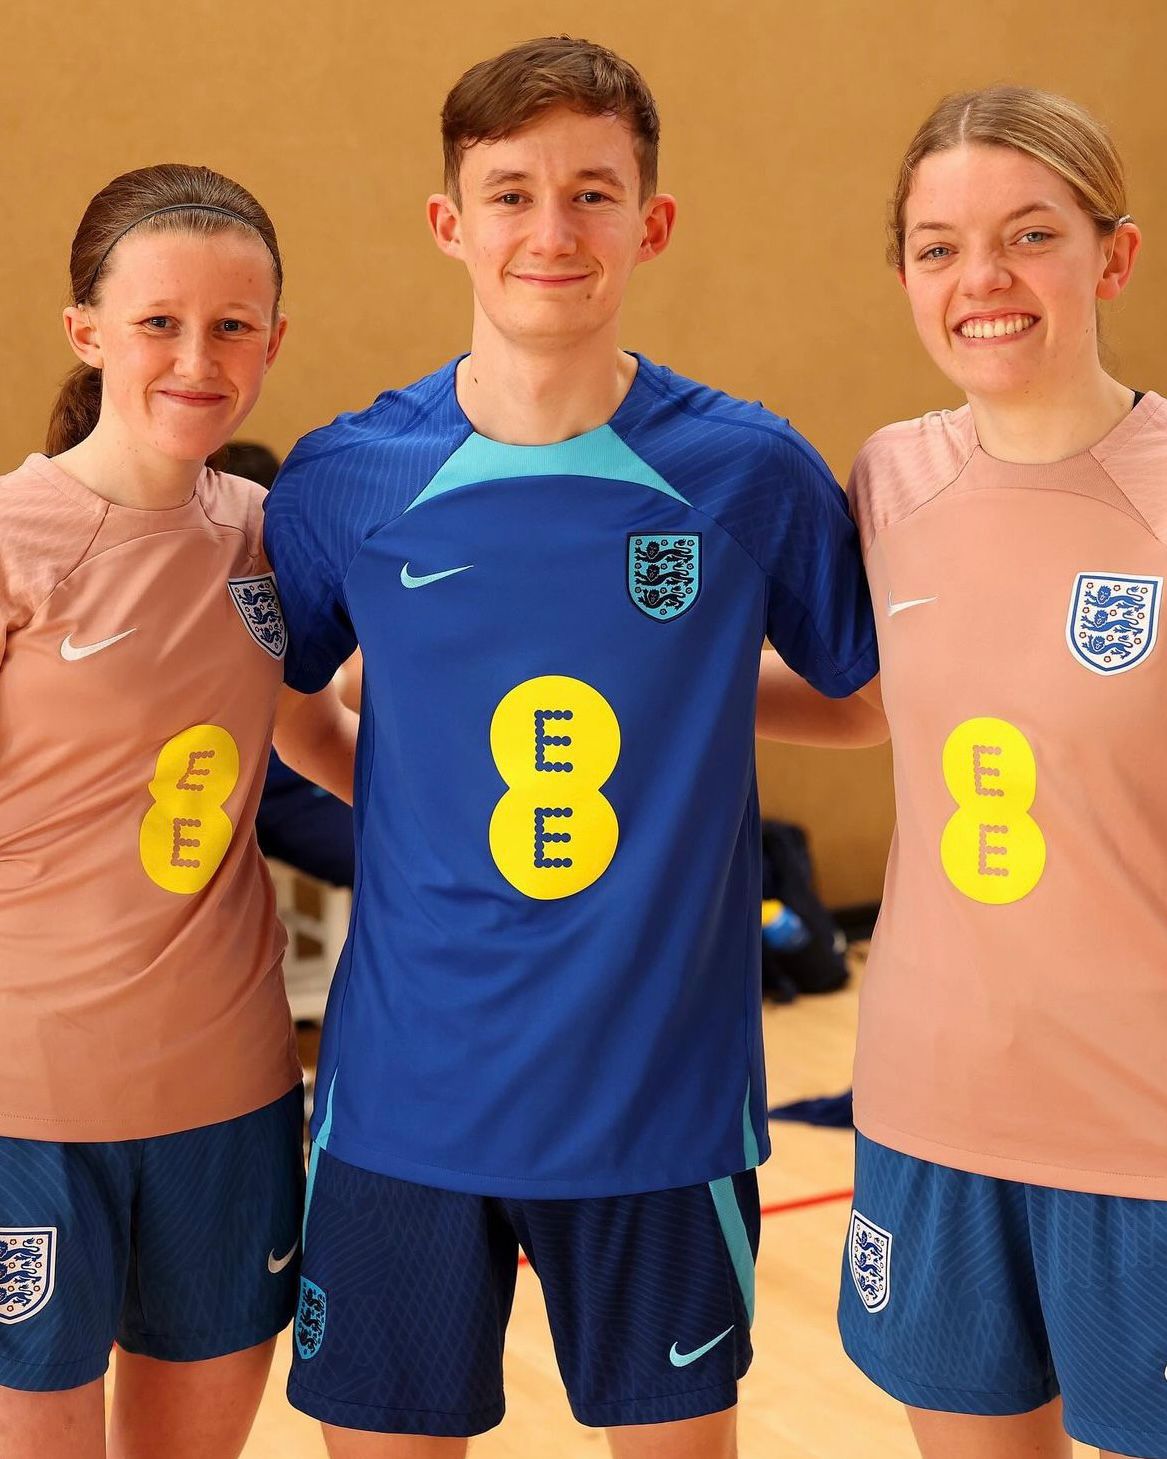 Jake, Faye, and another female player pose for a photo together in a sports hall.